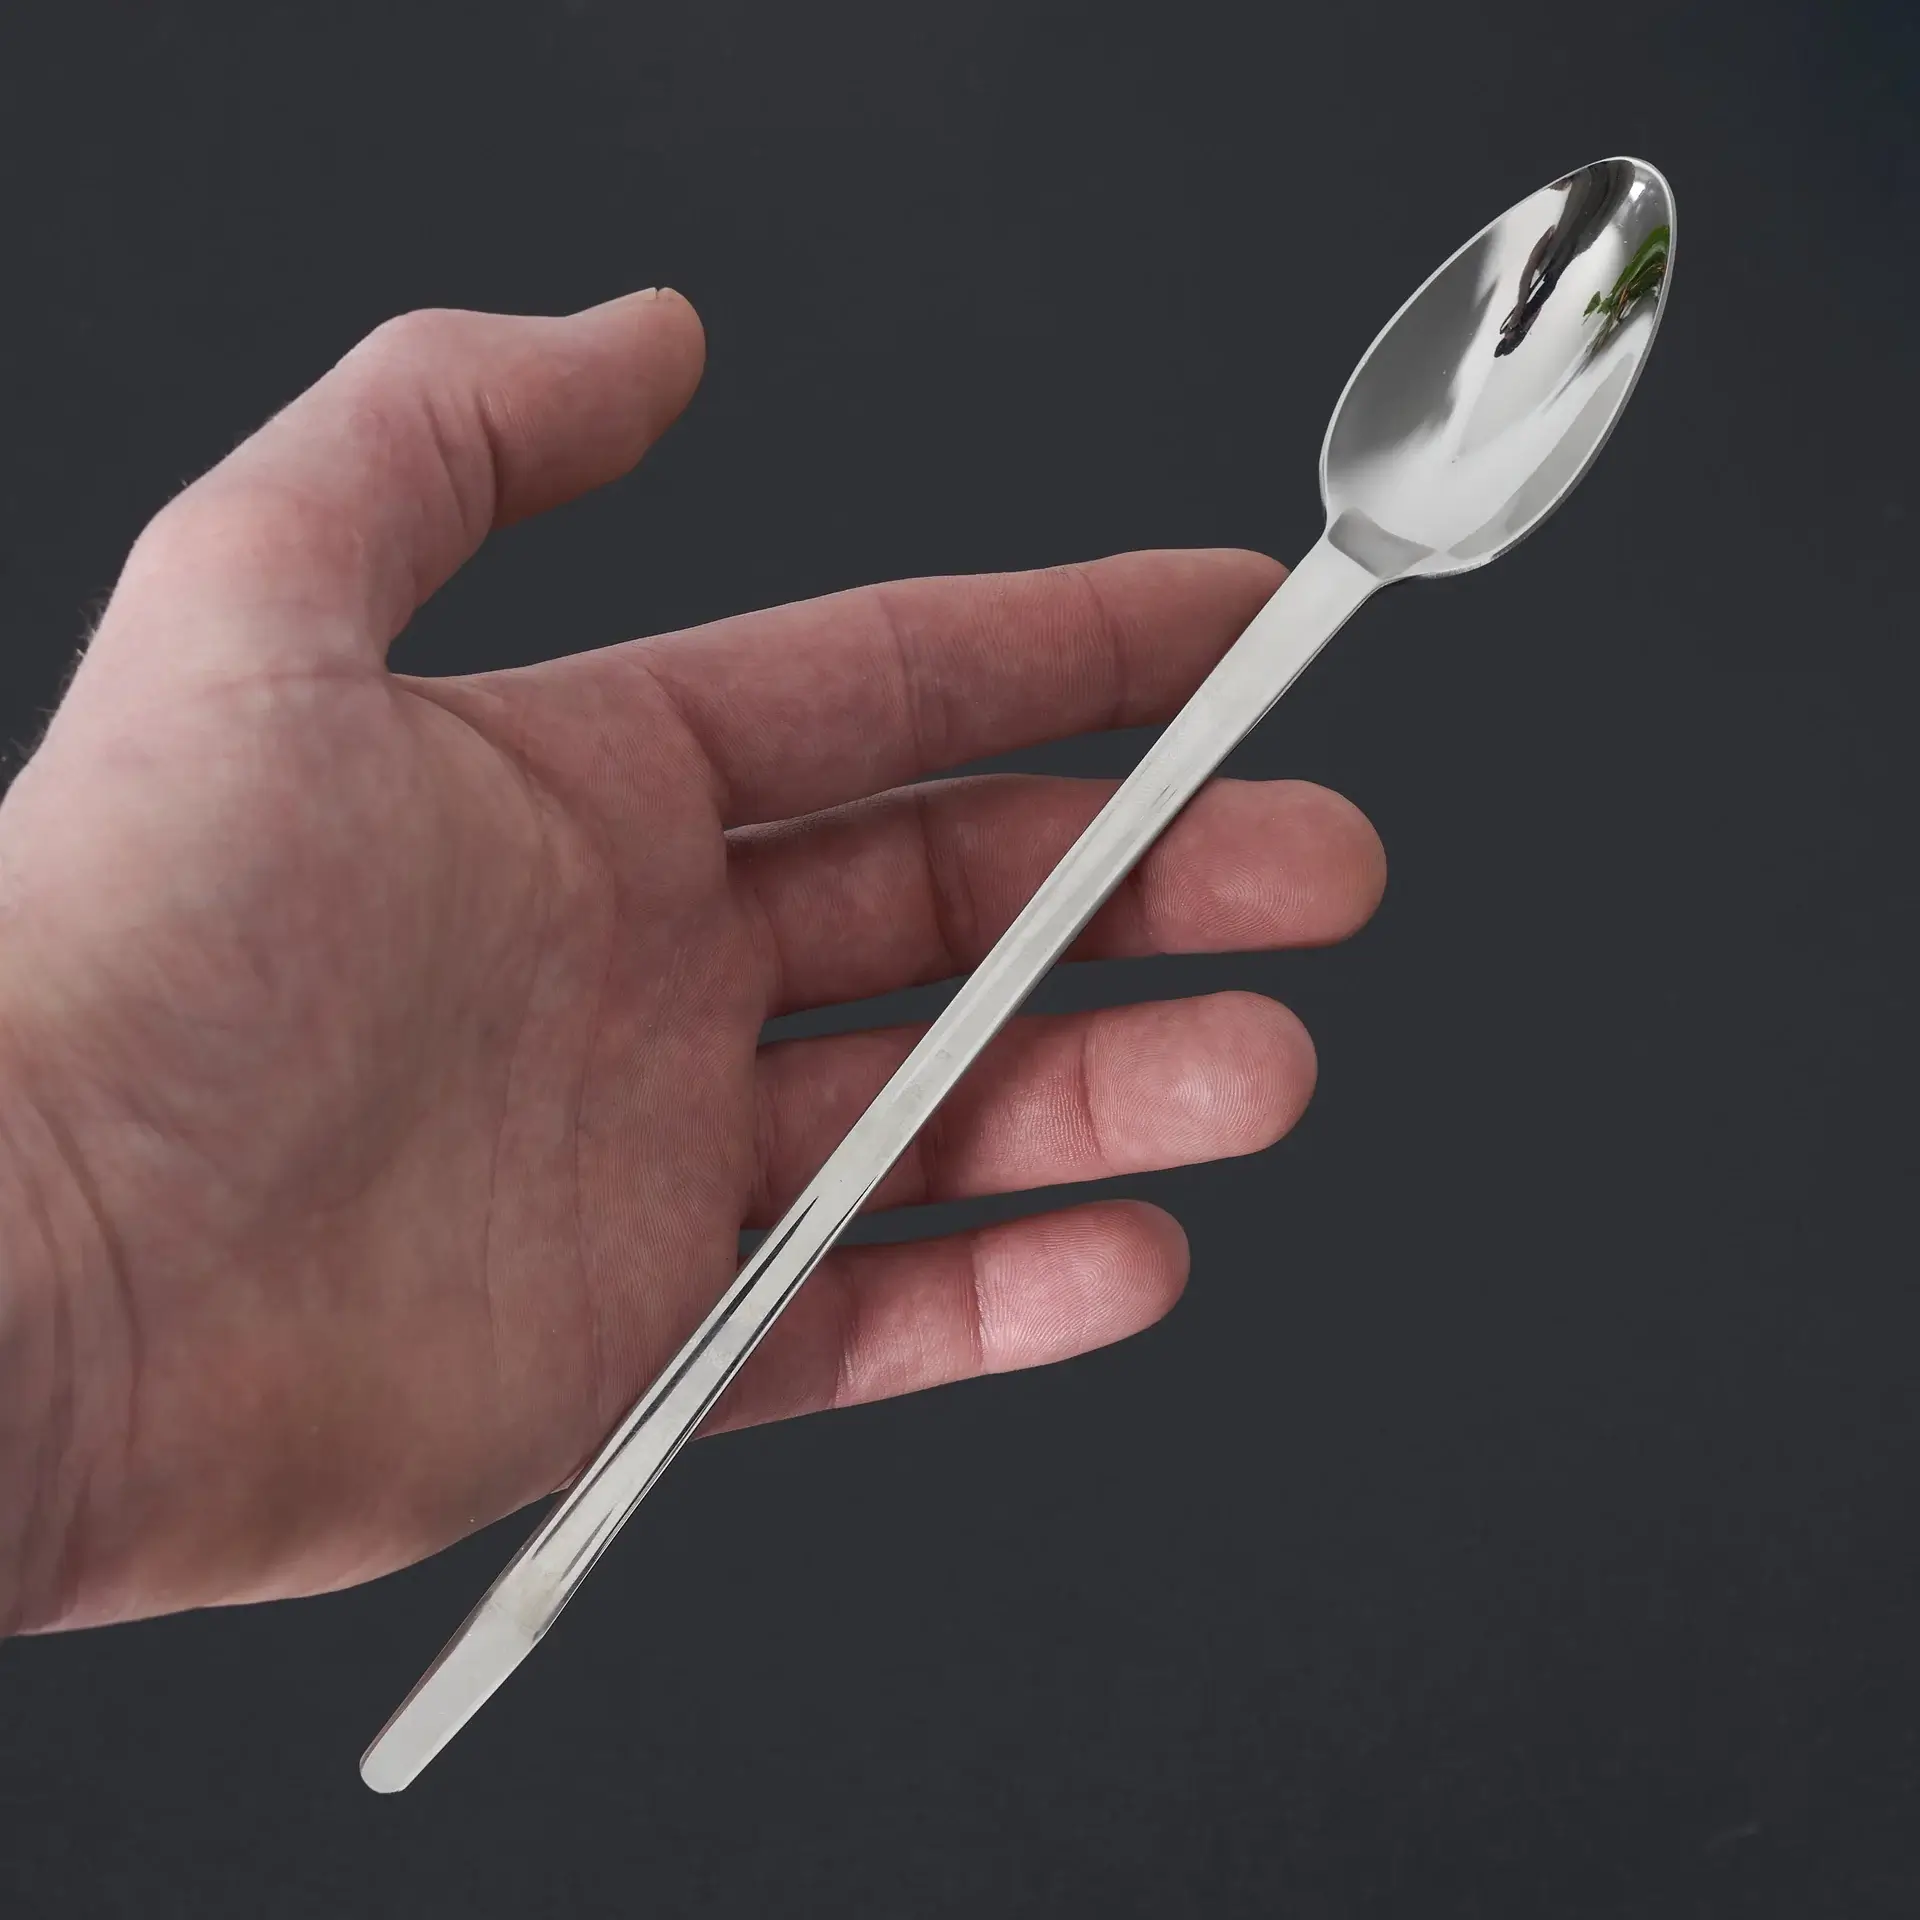 Quenelle Spoon: The Best Kitchen Tool You Never Knew You Needed